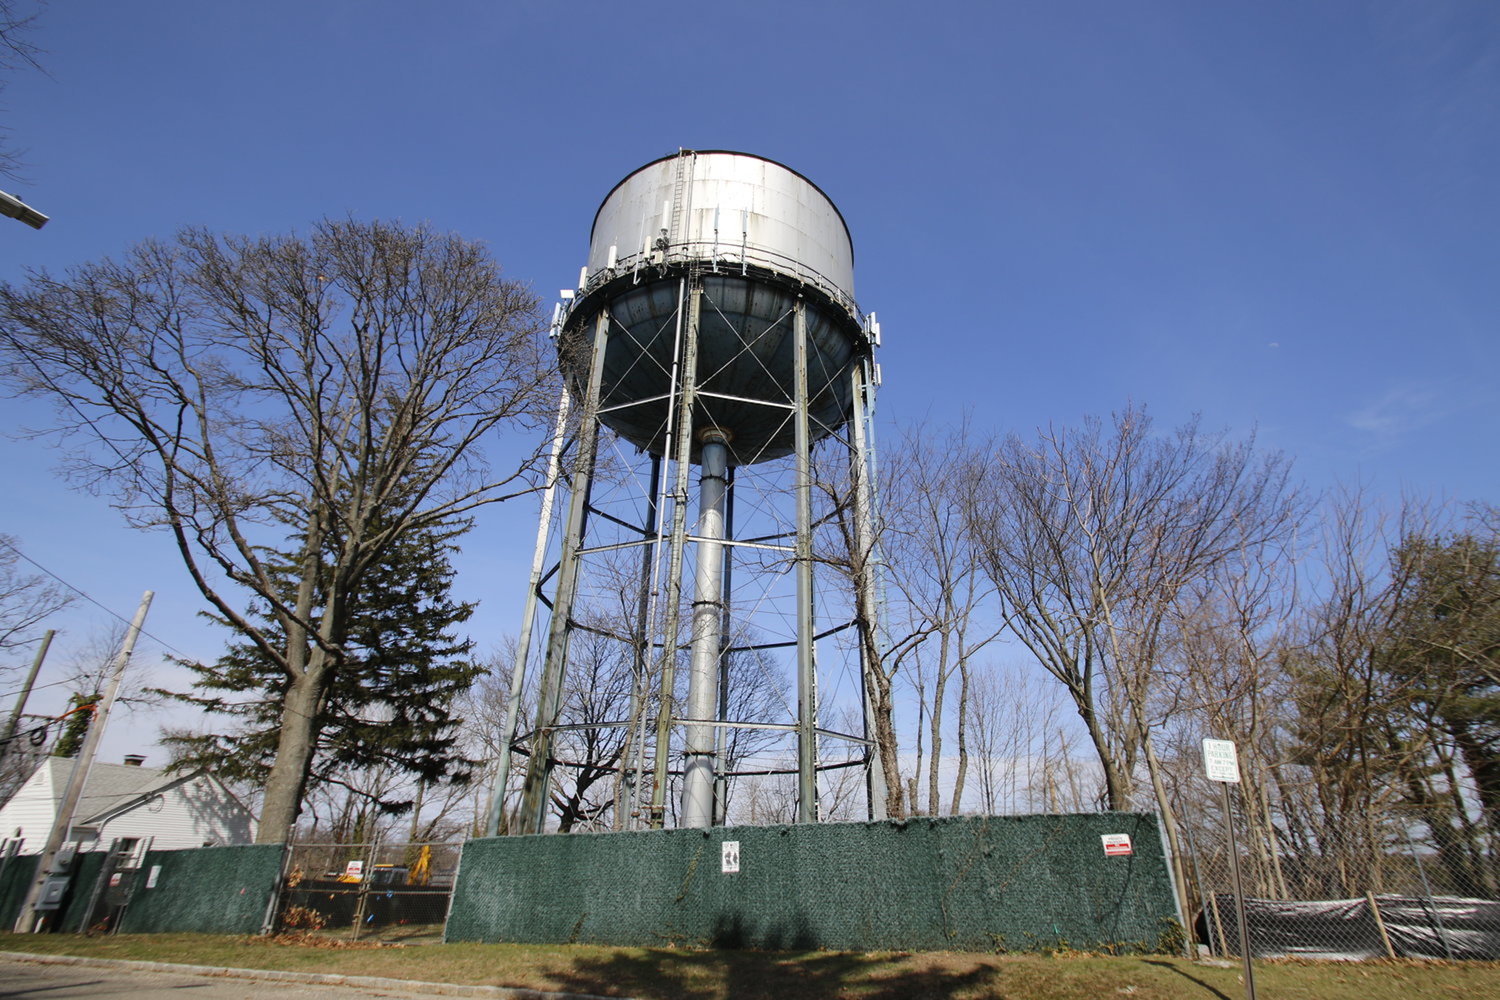 The public takeover of Liberty Water may be on the horizon. The Nassau County Legislature has recently appointed two commissioners to serve on the South Nassau Water Authority board.